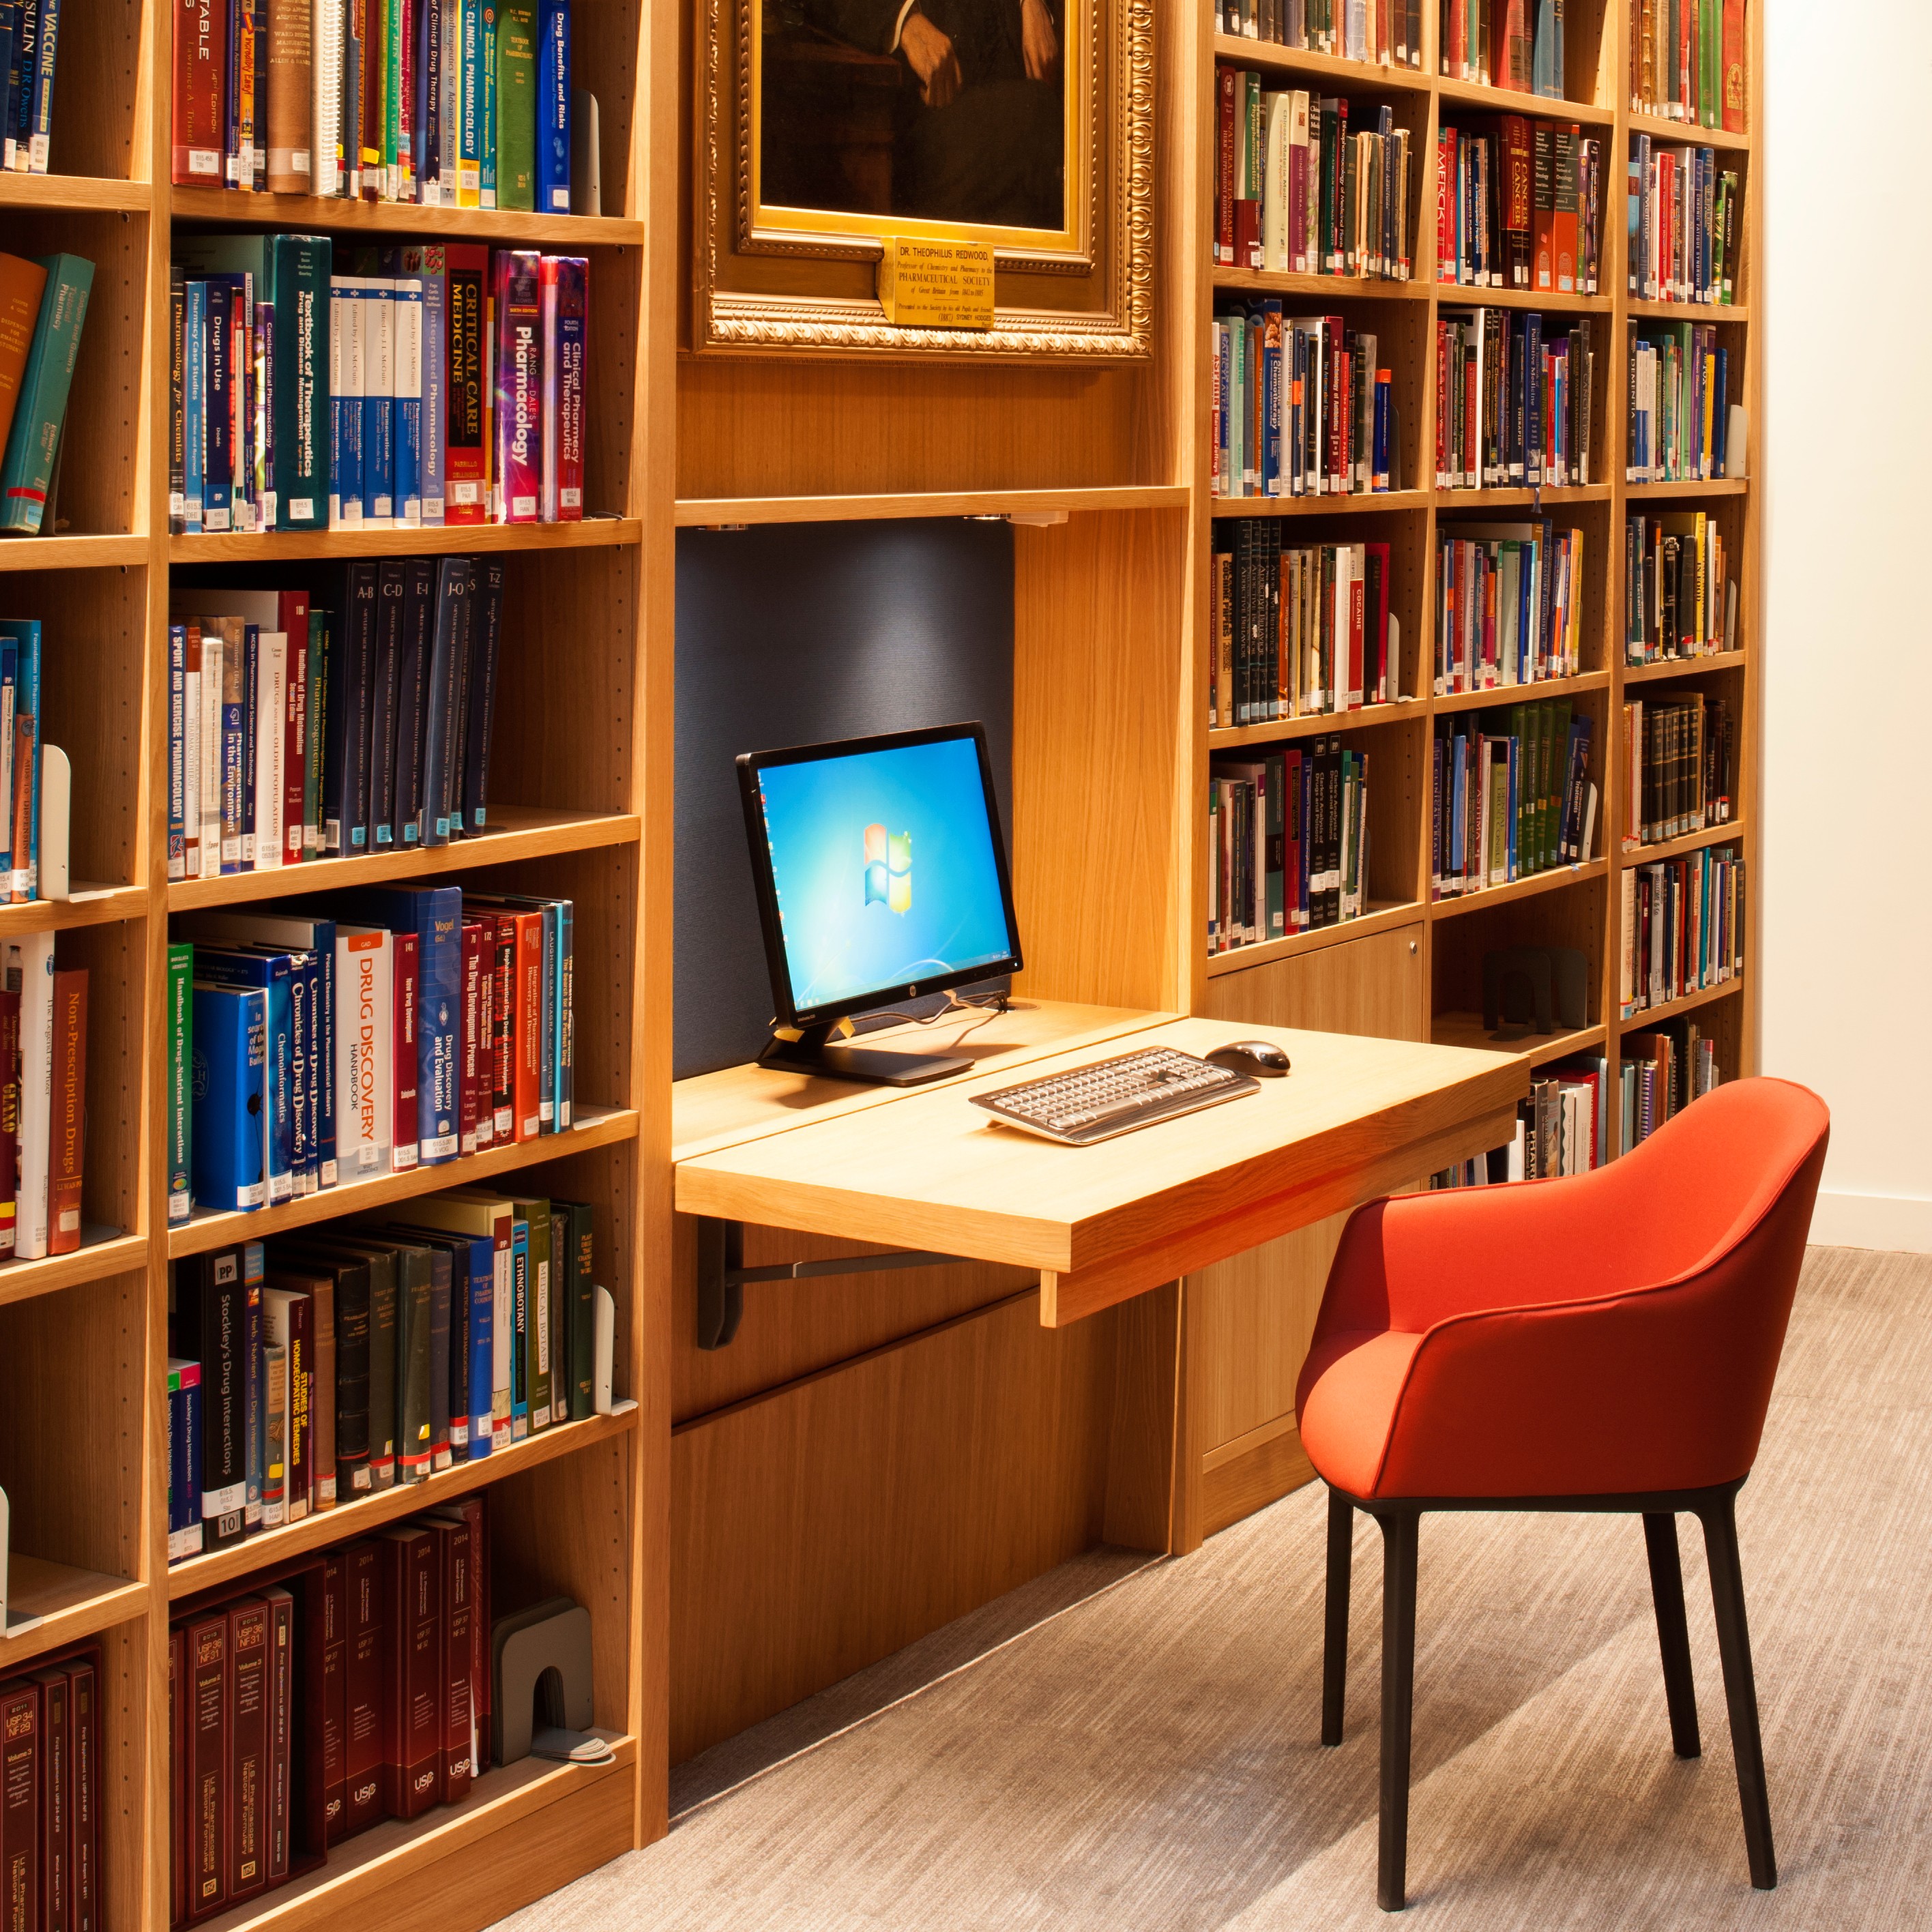 View of the Library showing a desk with a computer and chair, under a framed portrait of Theophilus Redwood, surrounded by wooden shelves holding books.